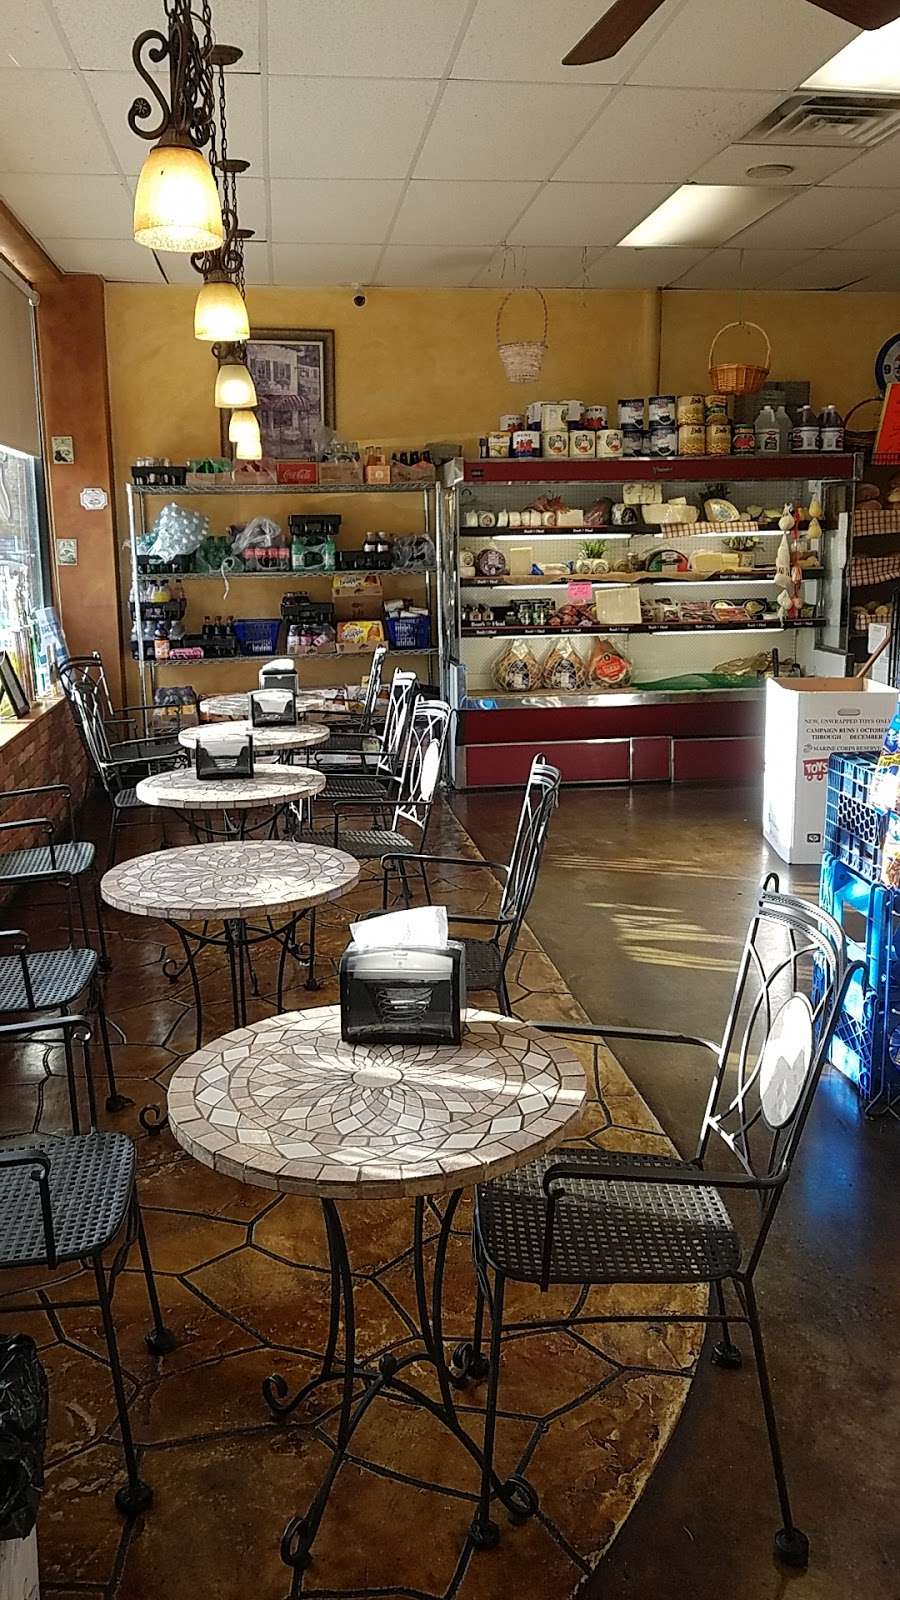 Bucci Brothers Deli & Catering | 926 Route 6, Mahopac, NY 10541, USA | Phone: (845) 628-3663